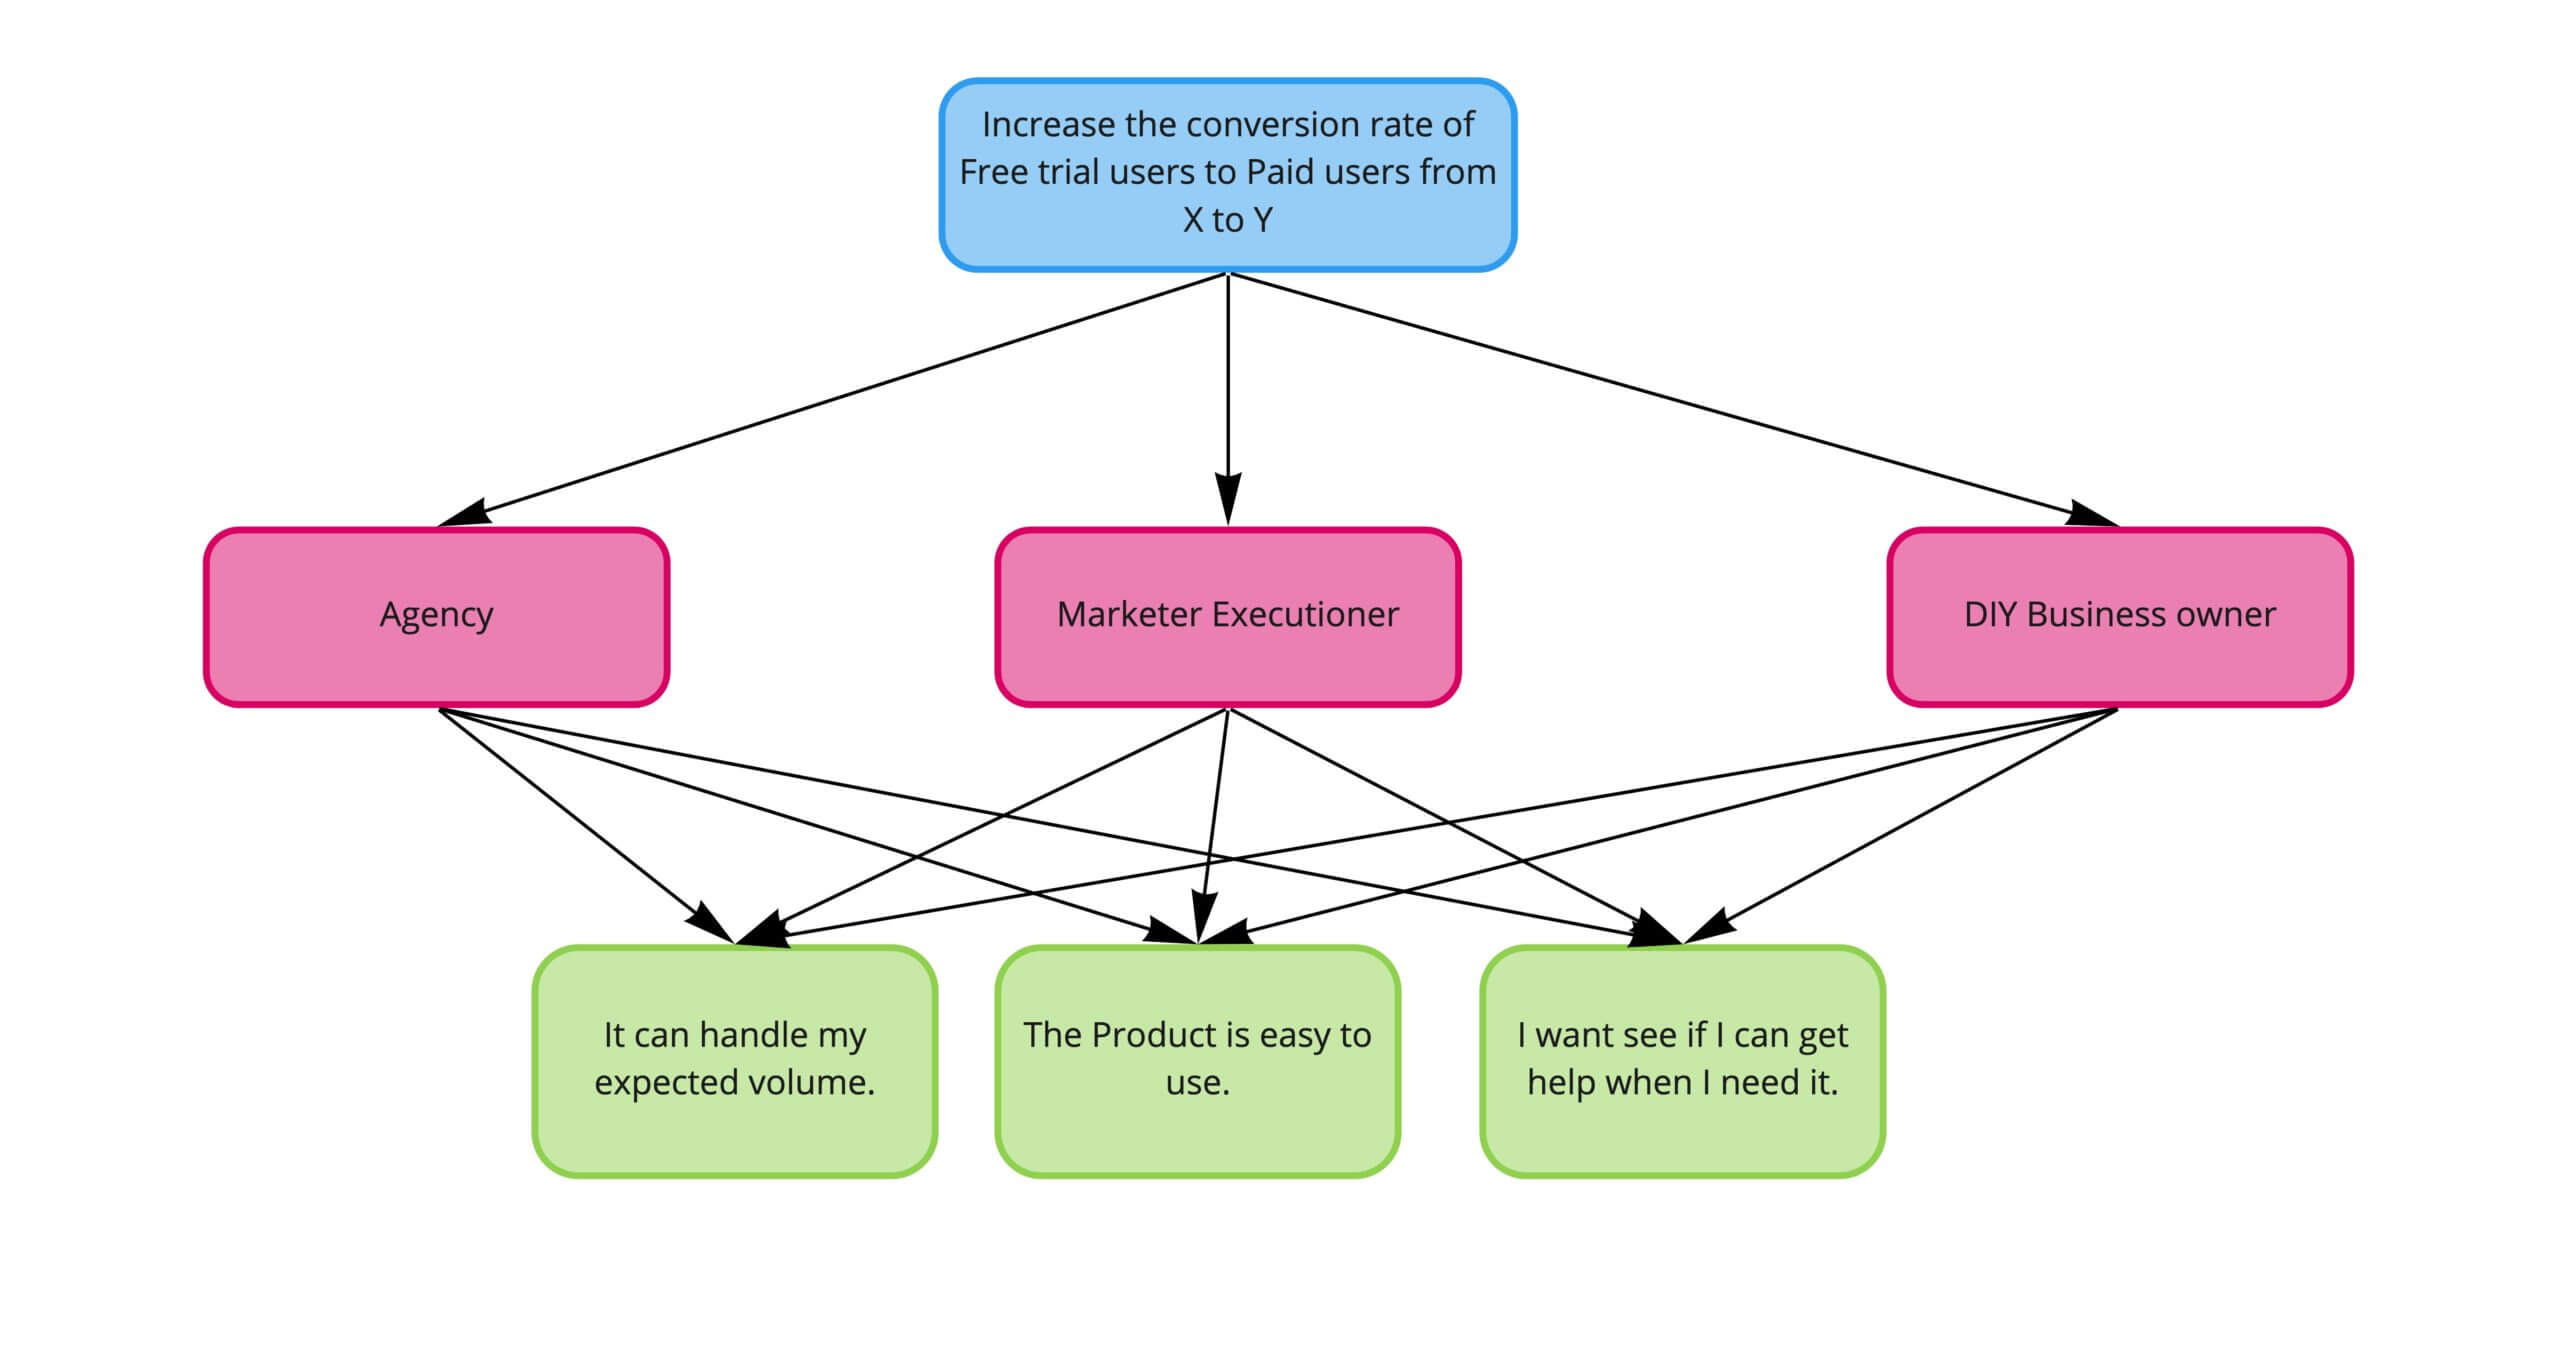 An opportunity solution tree diagram. At the top, the outcome reads, "Increase the conversion rate of free trial users to paid users from X to Y." This branches into three different customer groups: agency, marketer executioner, and DIY business owner. These customer groups branch into three opportunities, "It can handle my expected volume," "The product is easy to use," and "I want to see if I can get help when I need it." Each customer group branches into each opportunity, so there are many overlapping arrows.